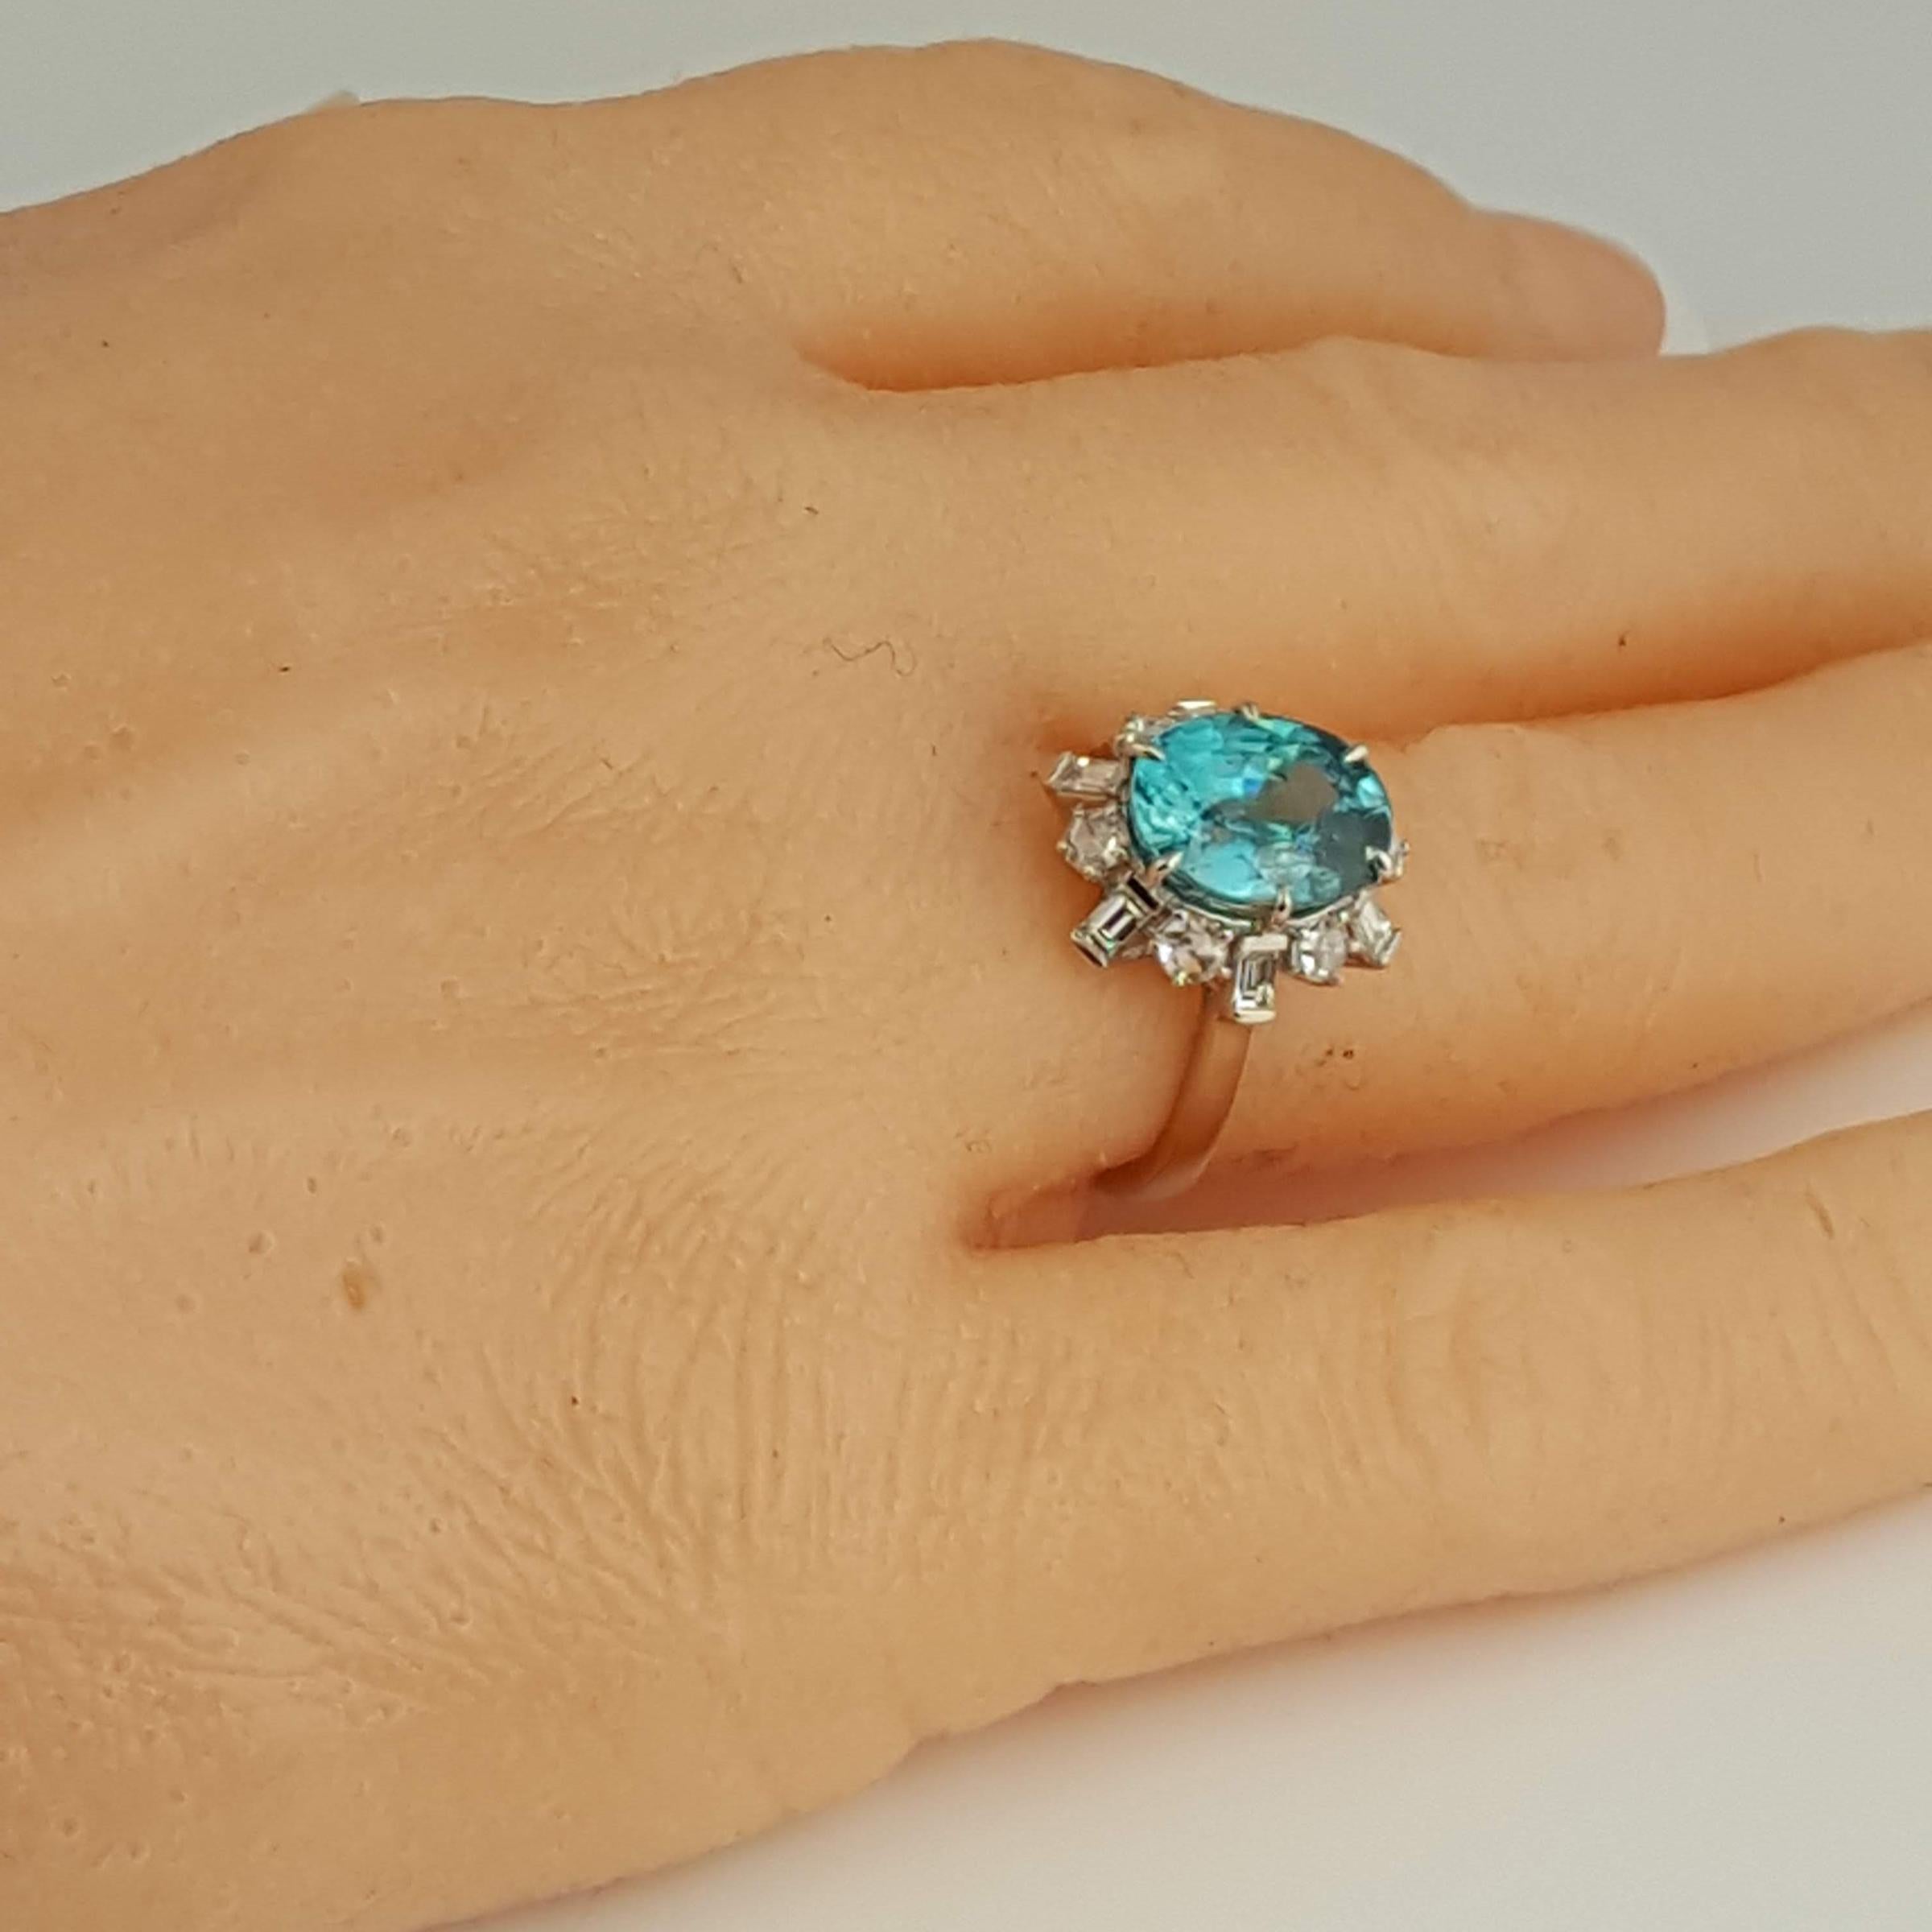 GIA Certified 6.85 Carat Oval Cut Blue Zircon and Diamond Ring in 18W ref1313 For Sale 1